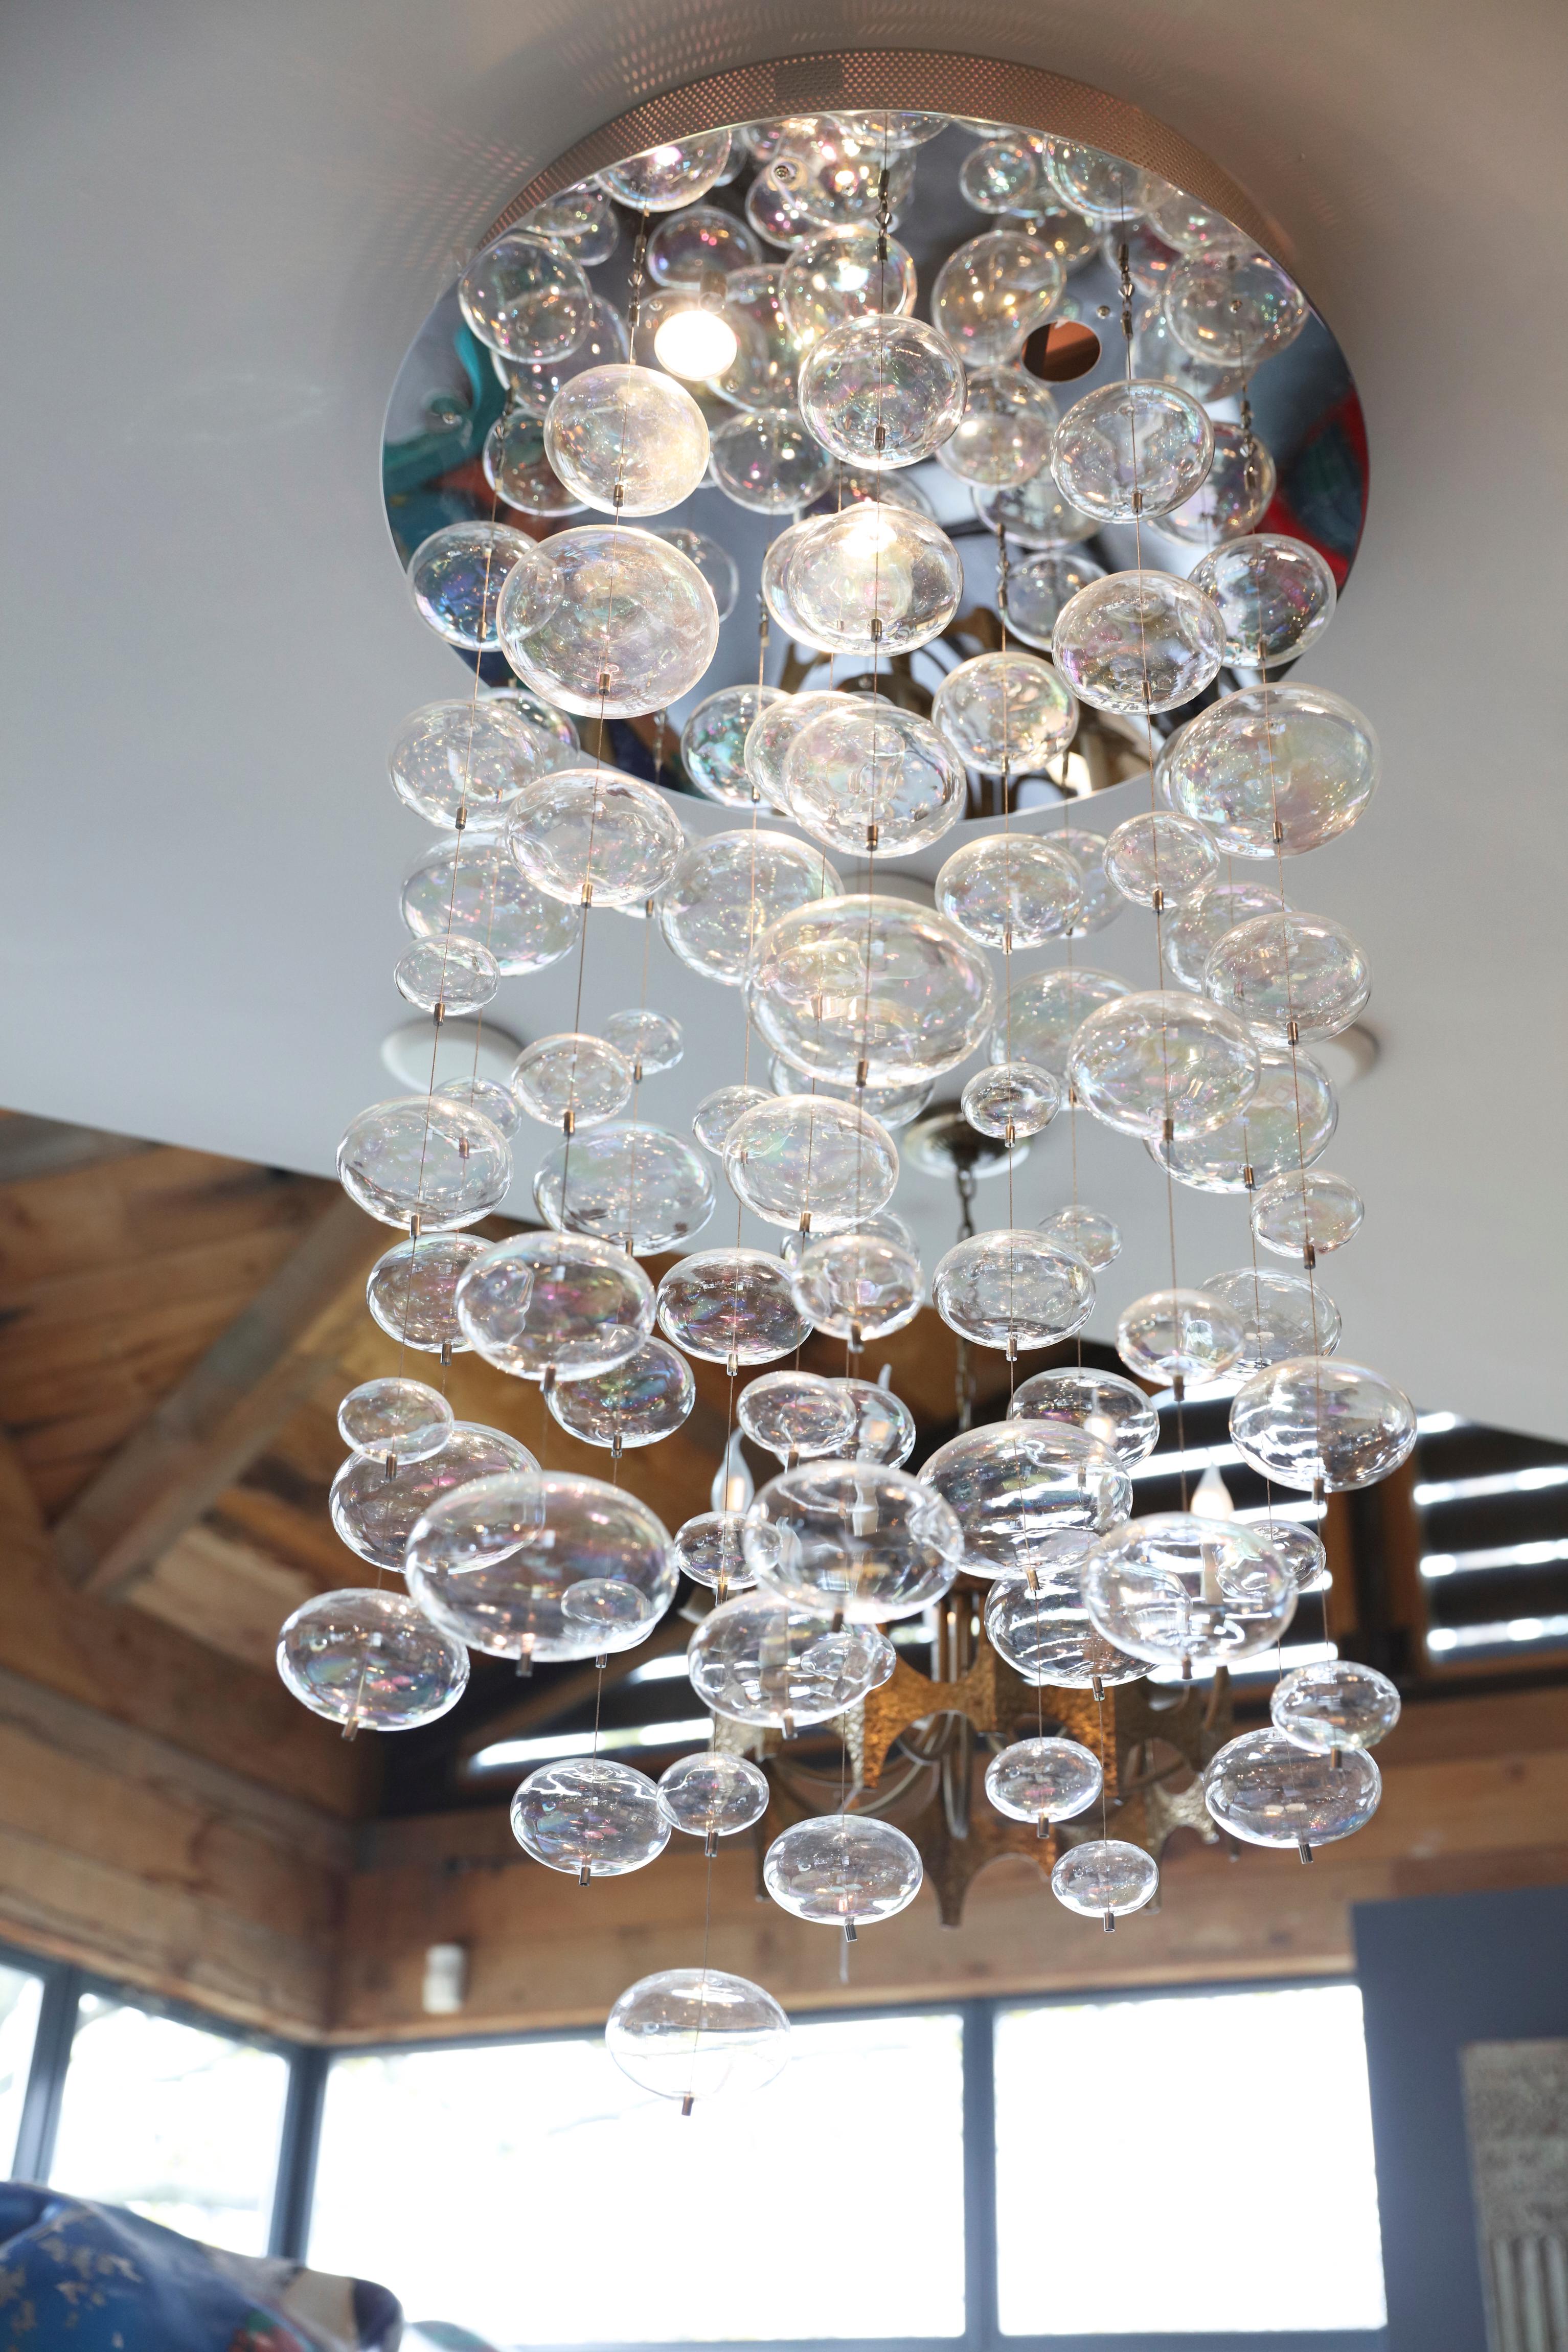 Gray Round Mirrored Ceiling Fixture w/ Iridescent Glass Bubbles